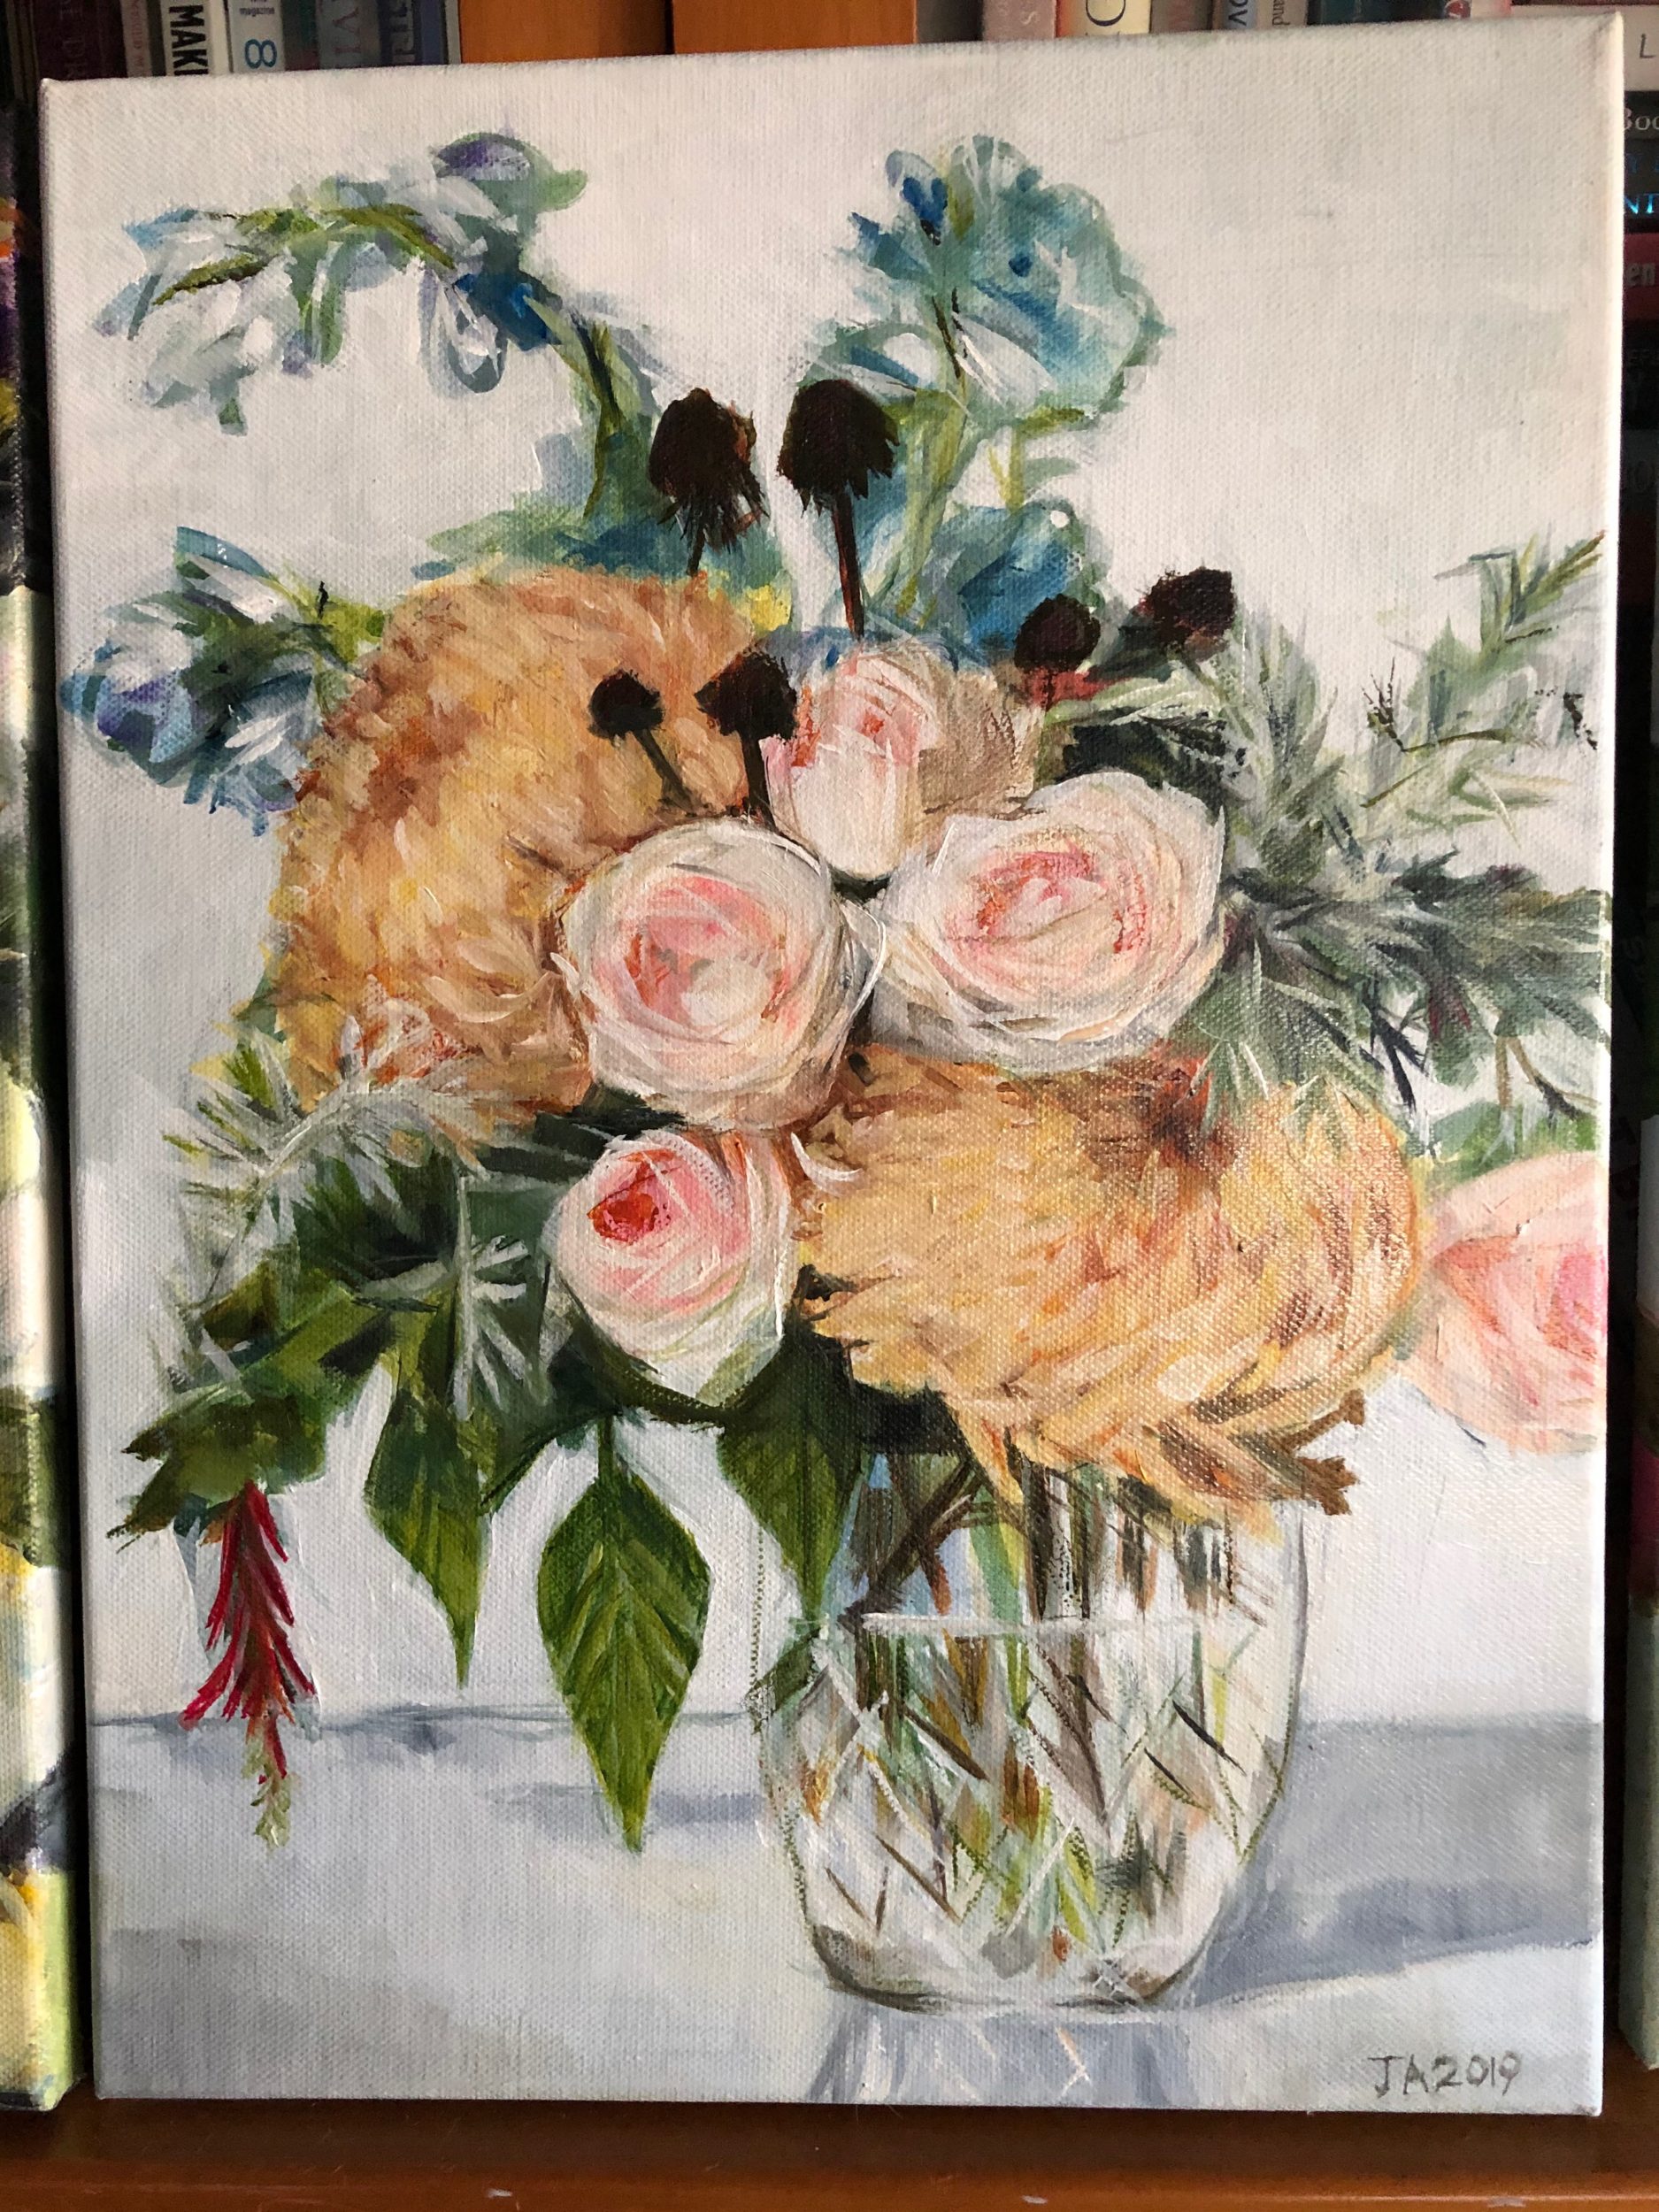 Rusty Crysanths and pink roses, oil paint on canvas